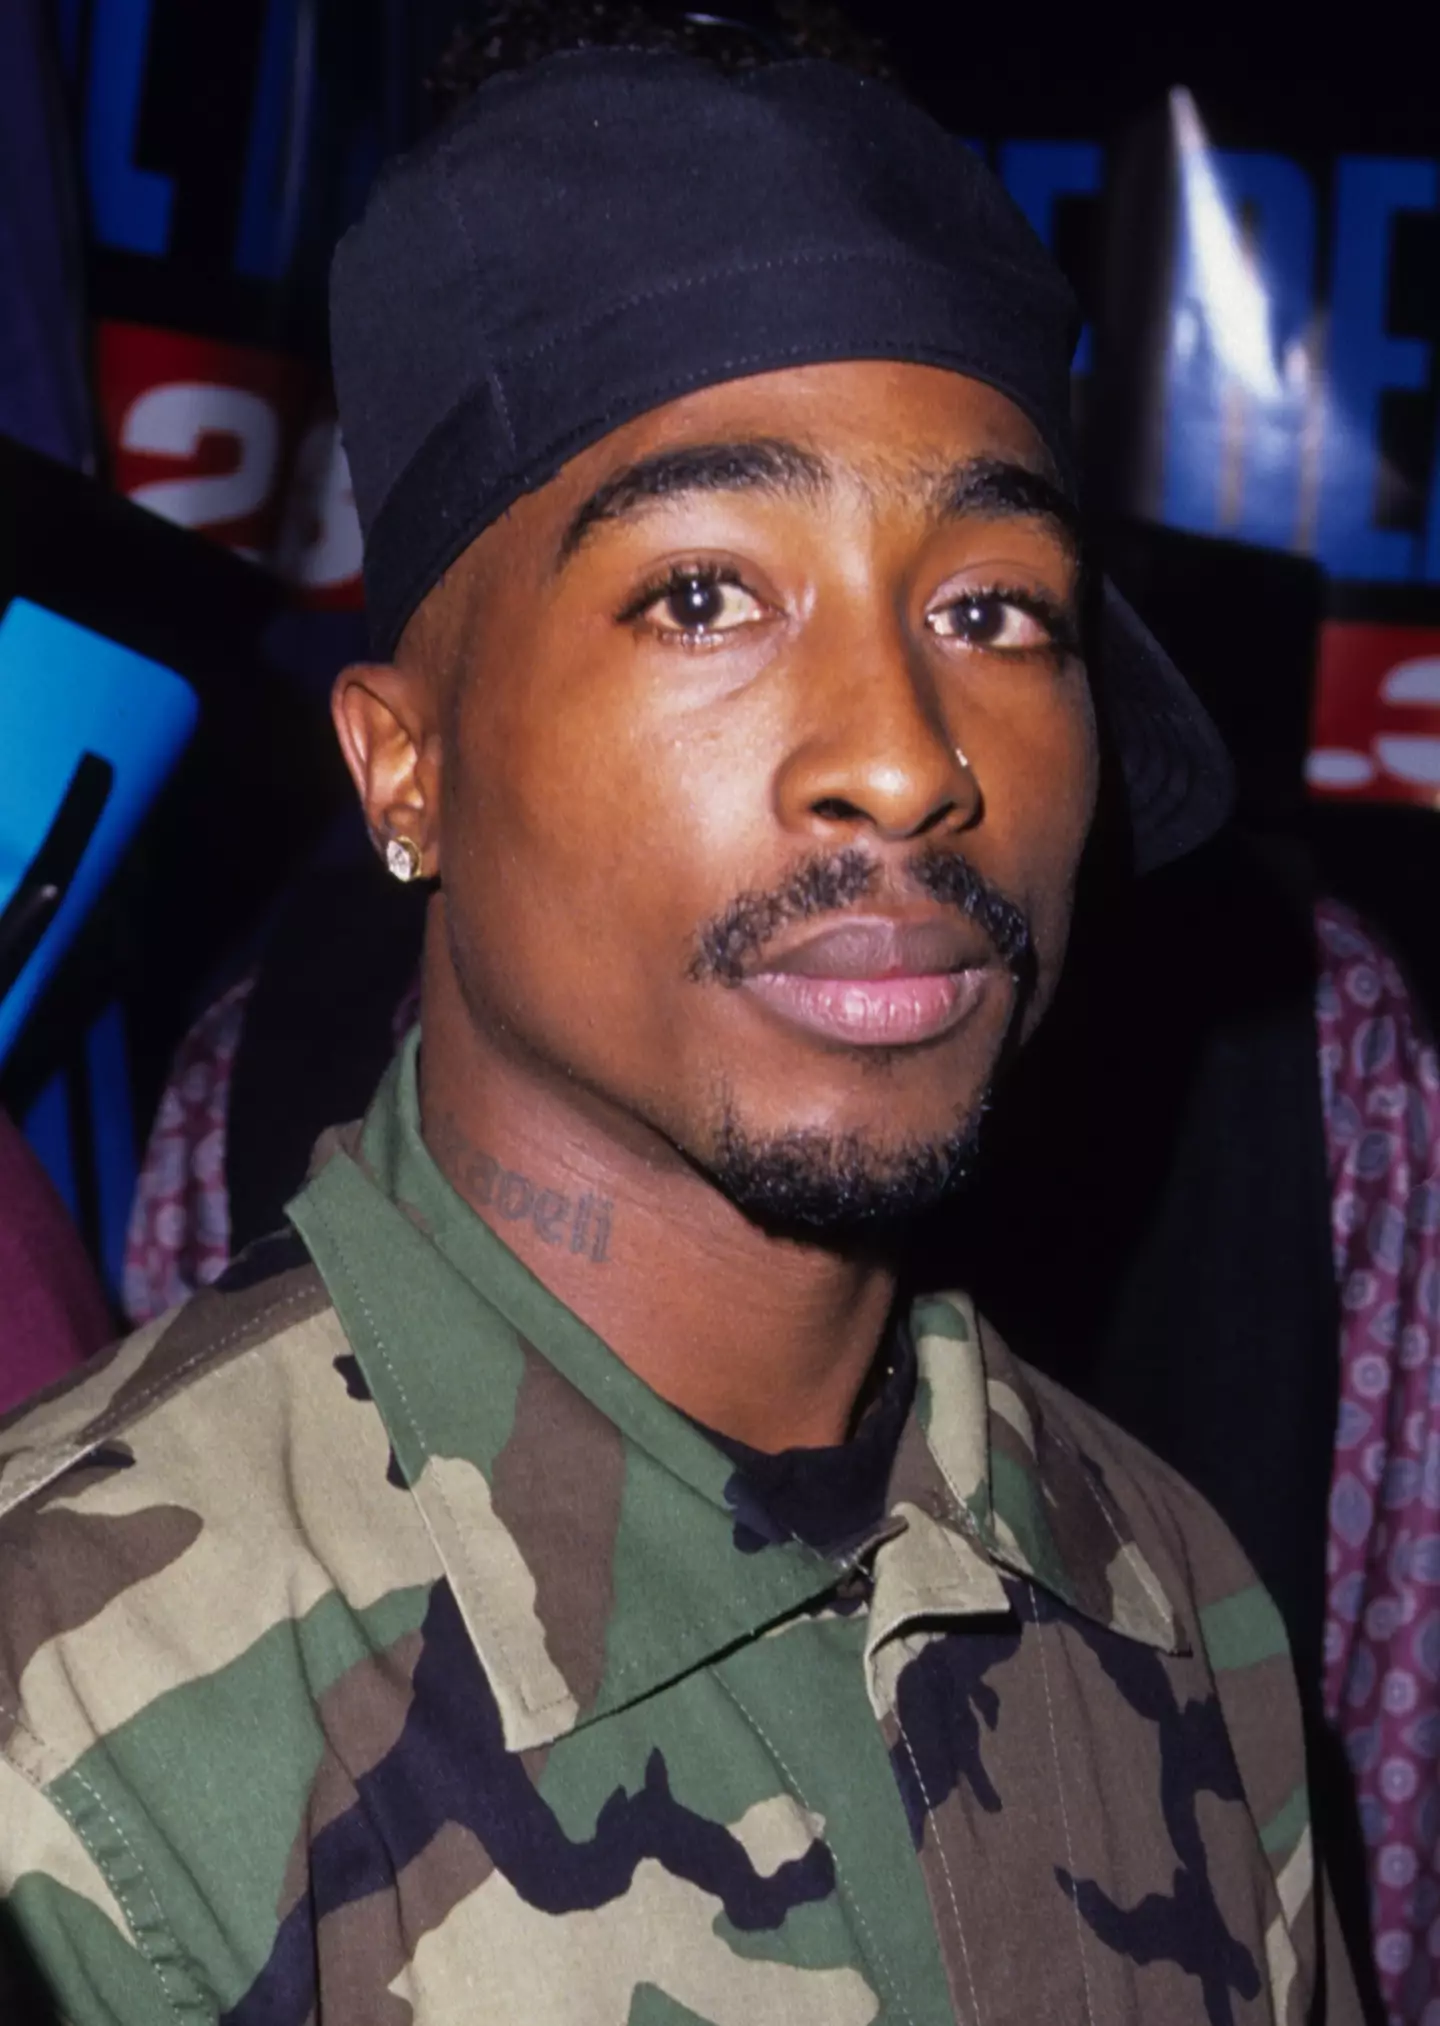 A grand jury heard Tupac's last words as they decided to indict a man for his murder.